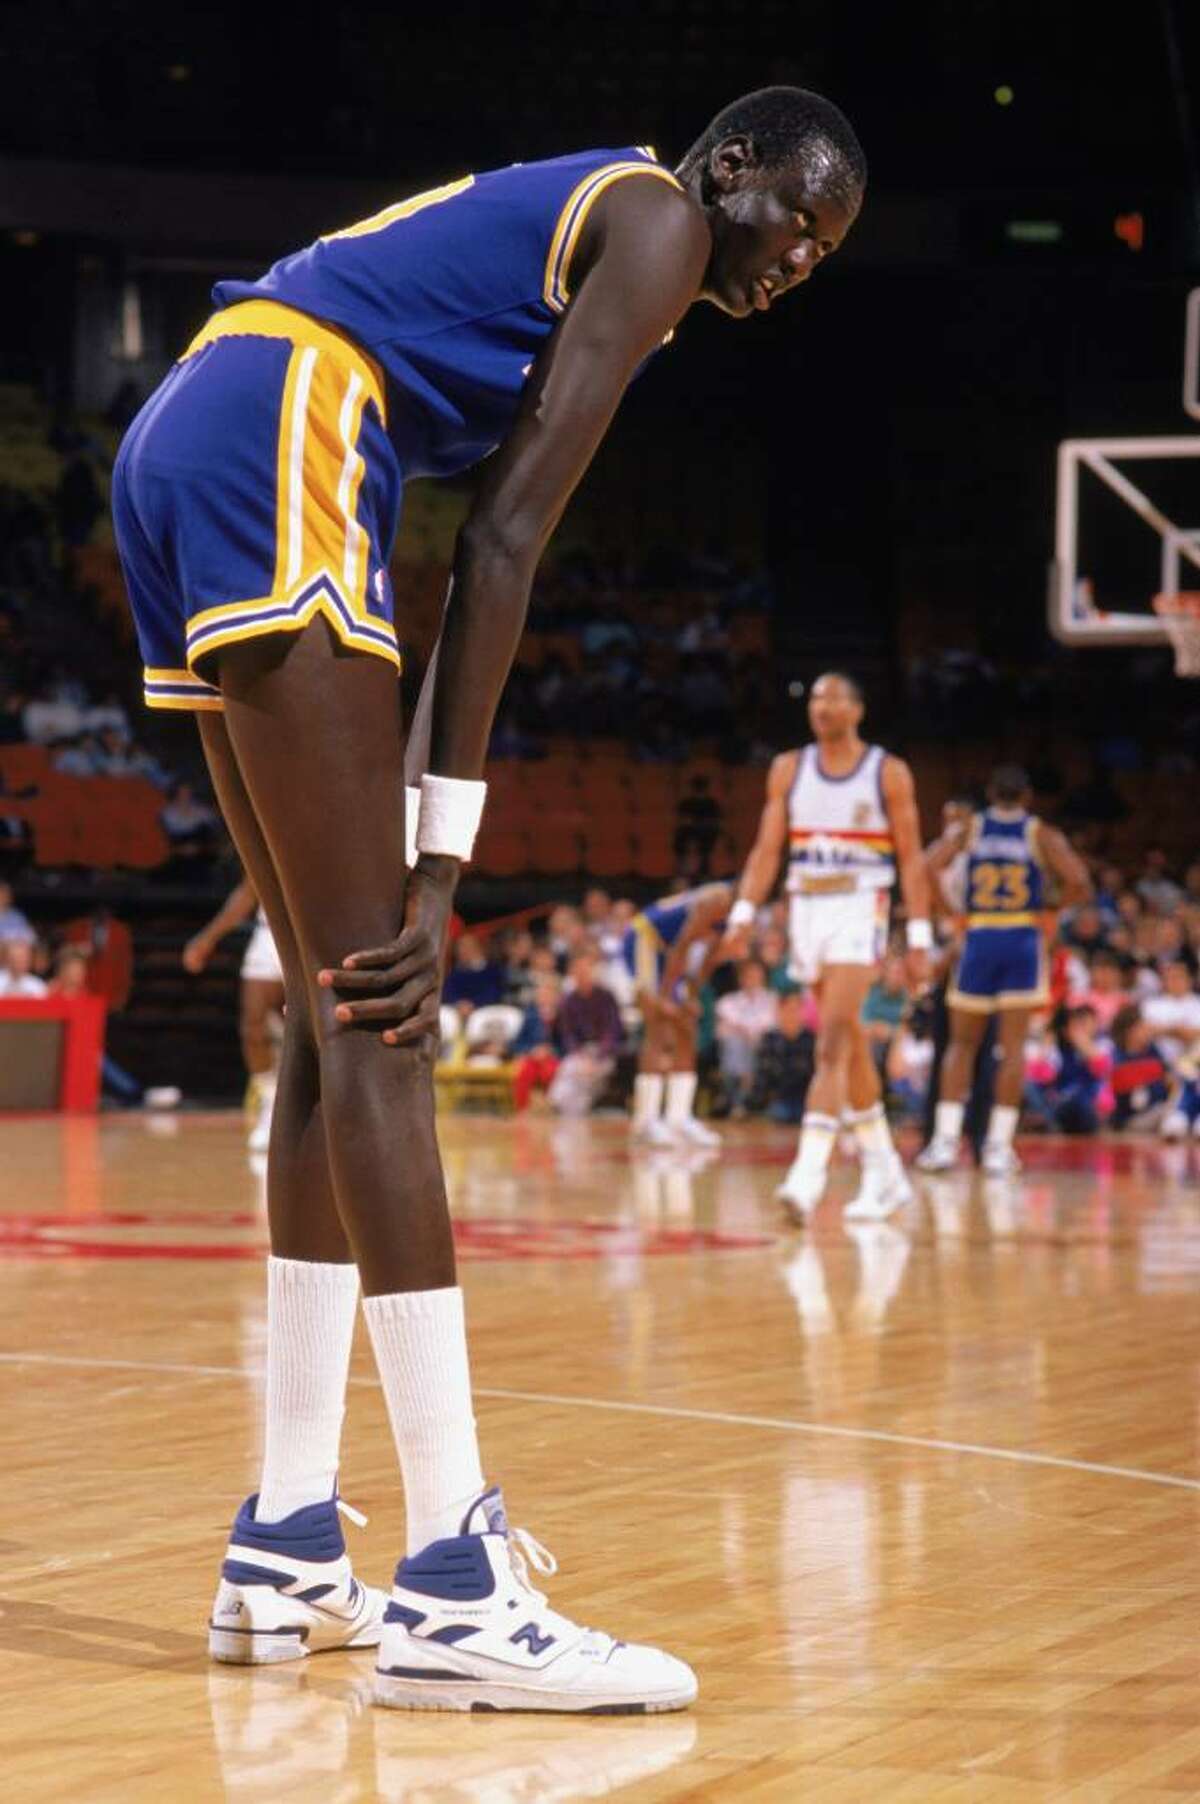 1988: Manute Bol #10 of the Golden State Warriors rests on the court during an NBA game in the 1988-89 season. NOTE TO USER: User expressly acknowledges and agrees that, by downloading and/or using this Photograph, User is consenting to the terms and conditions of the Getty Images License Agreement. (Photo by: Tim DeFrisco/Getty Images